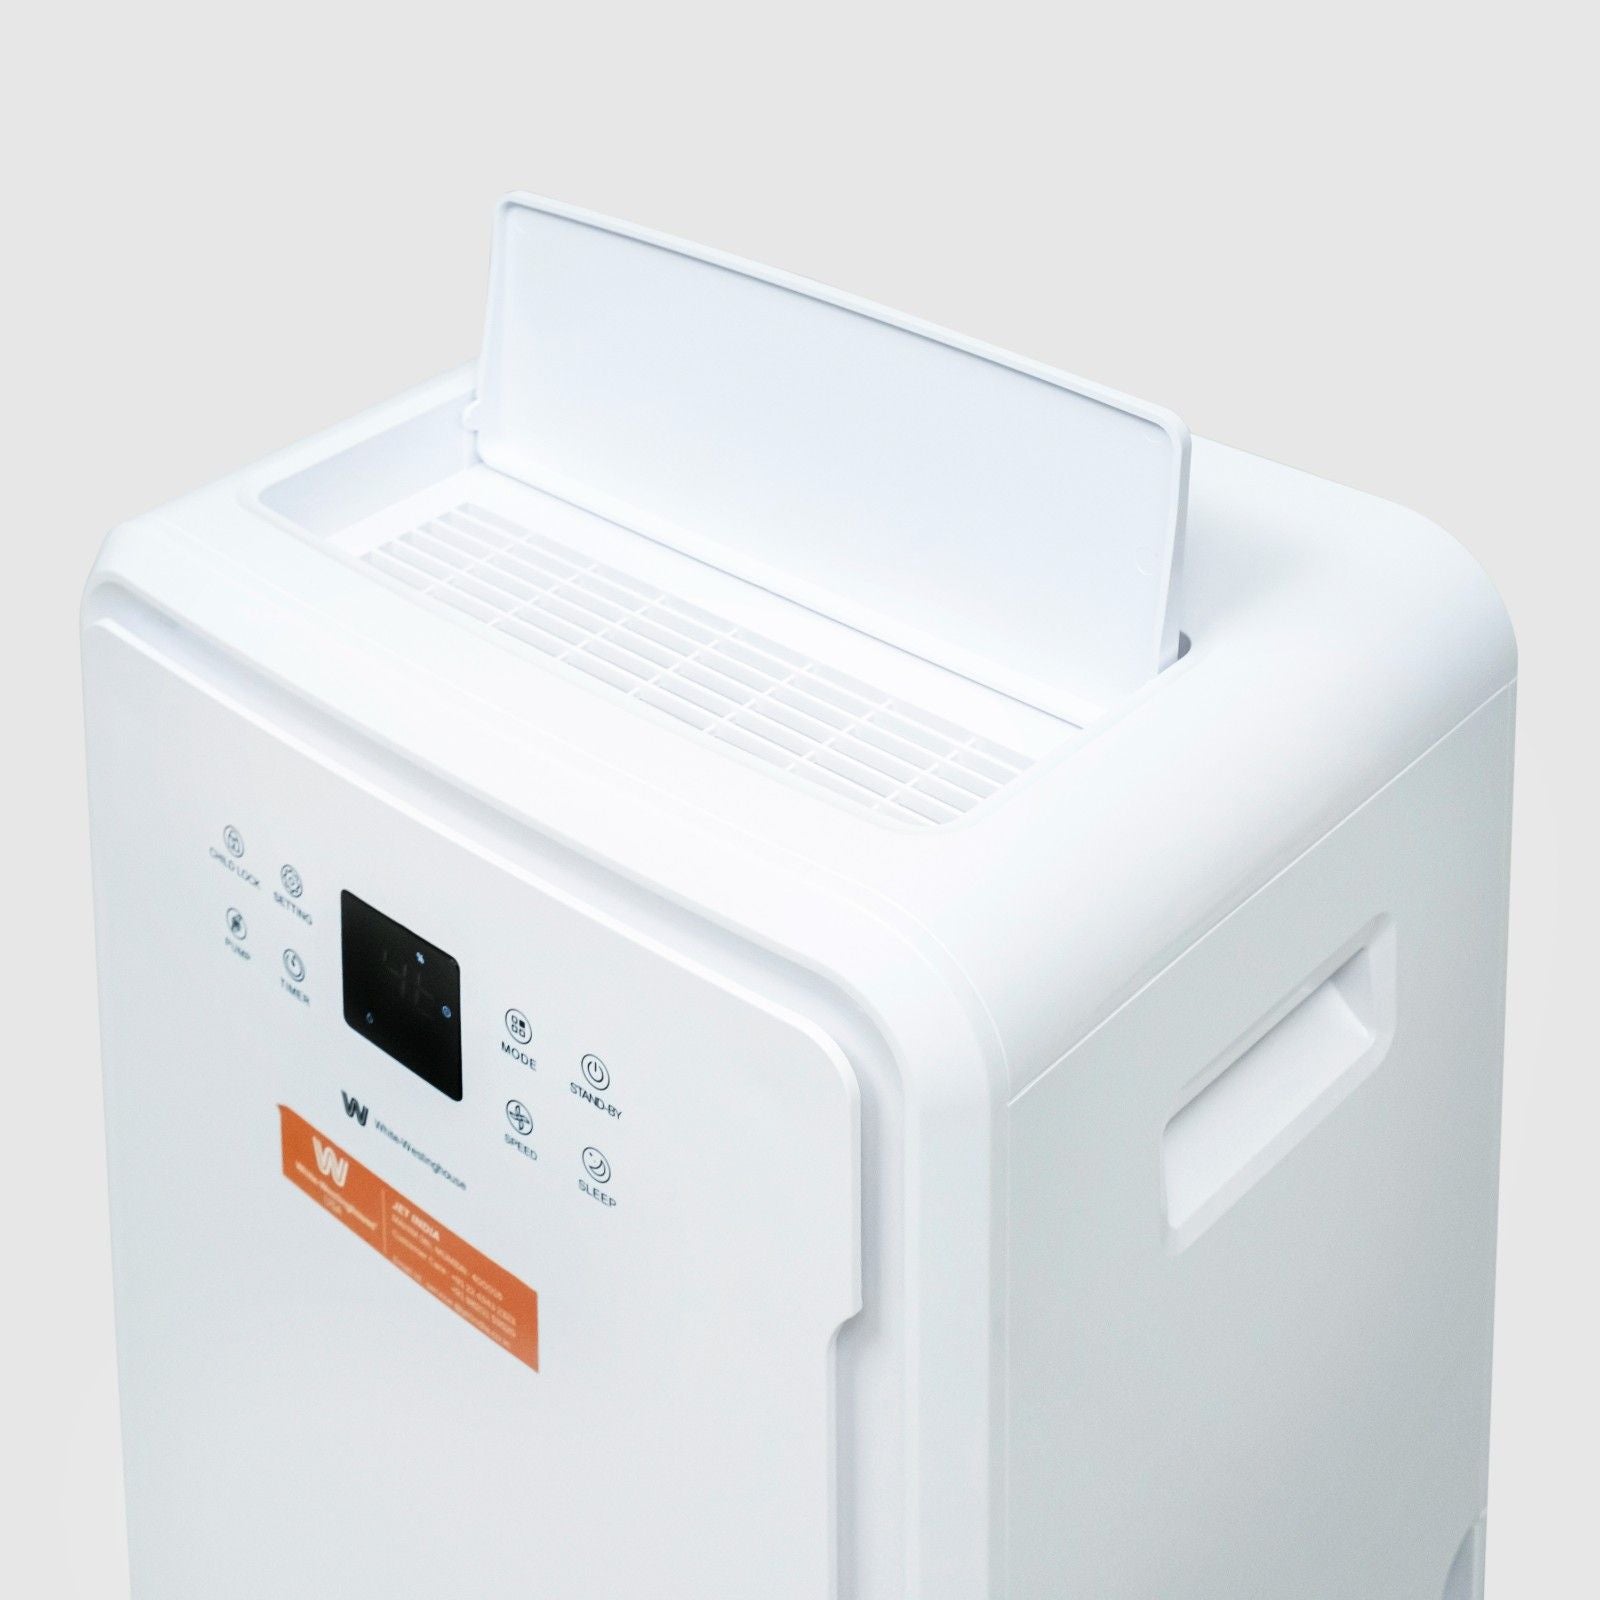 Top angled view of the White Westinghouse Dehumidifier WDE702, showcasing the digital control panel, air vent, and built-in handle for easy mobility. The sleek white design is suitable for maintaining optimal humidity levels in residential and commercial spaces.